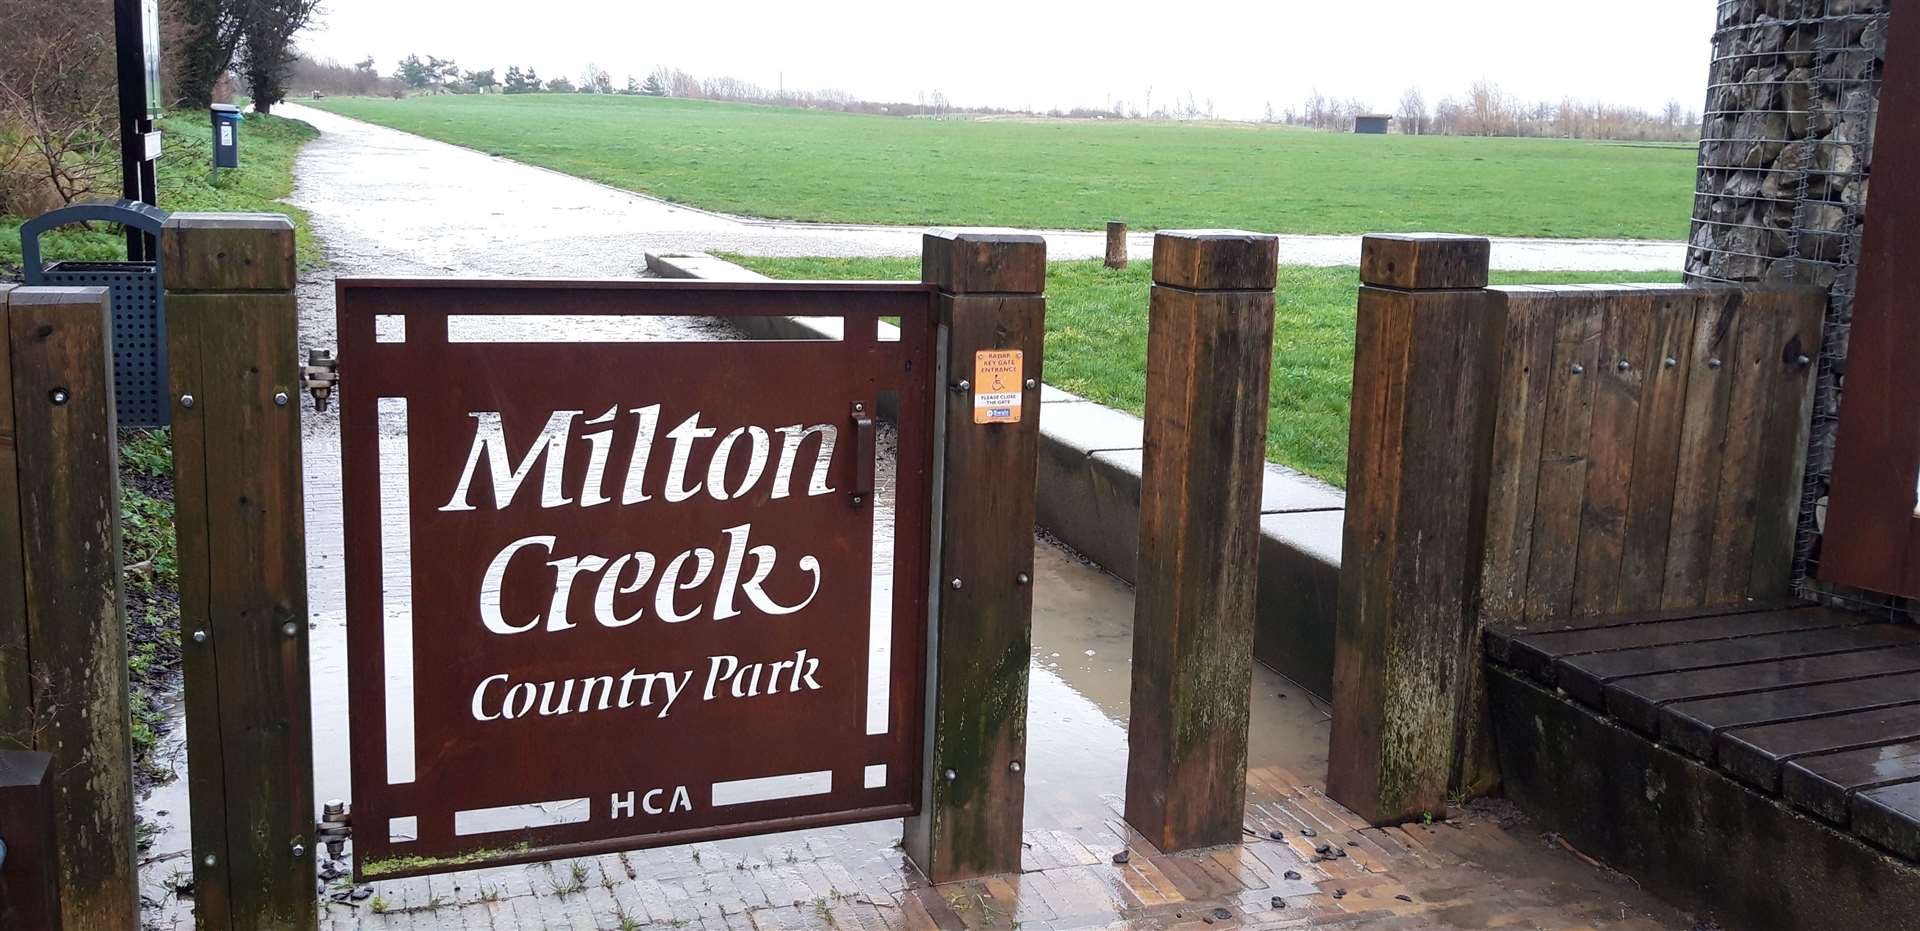 Entrance to Milton Creek Country Park, near Sittingbourne. Picture: Ken Mears